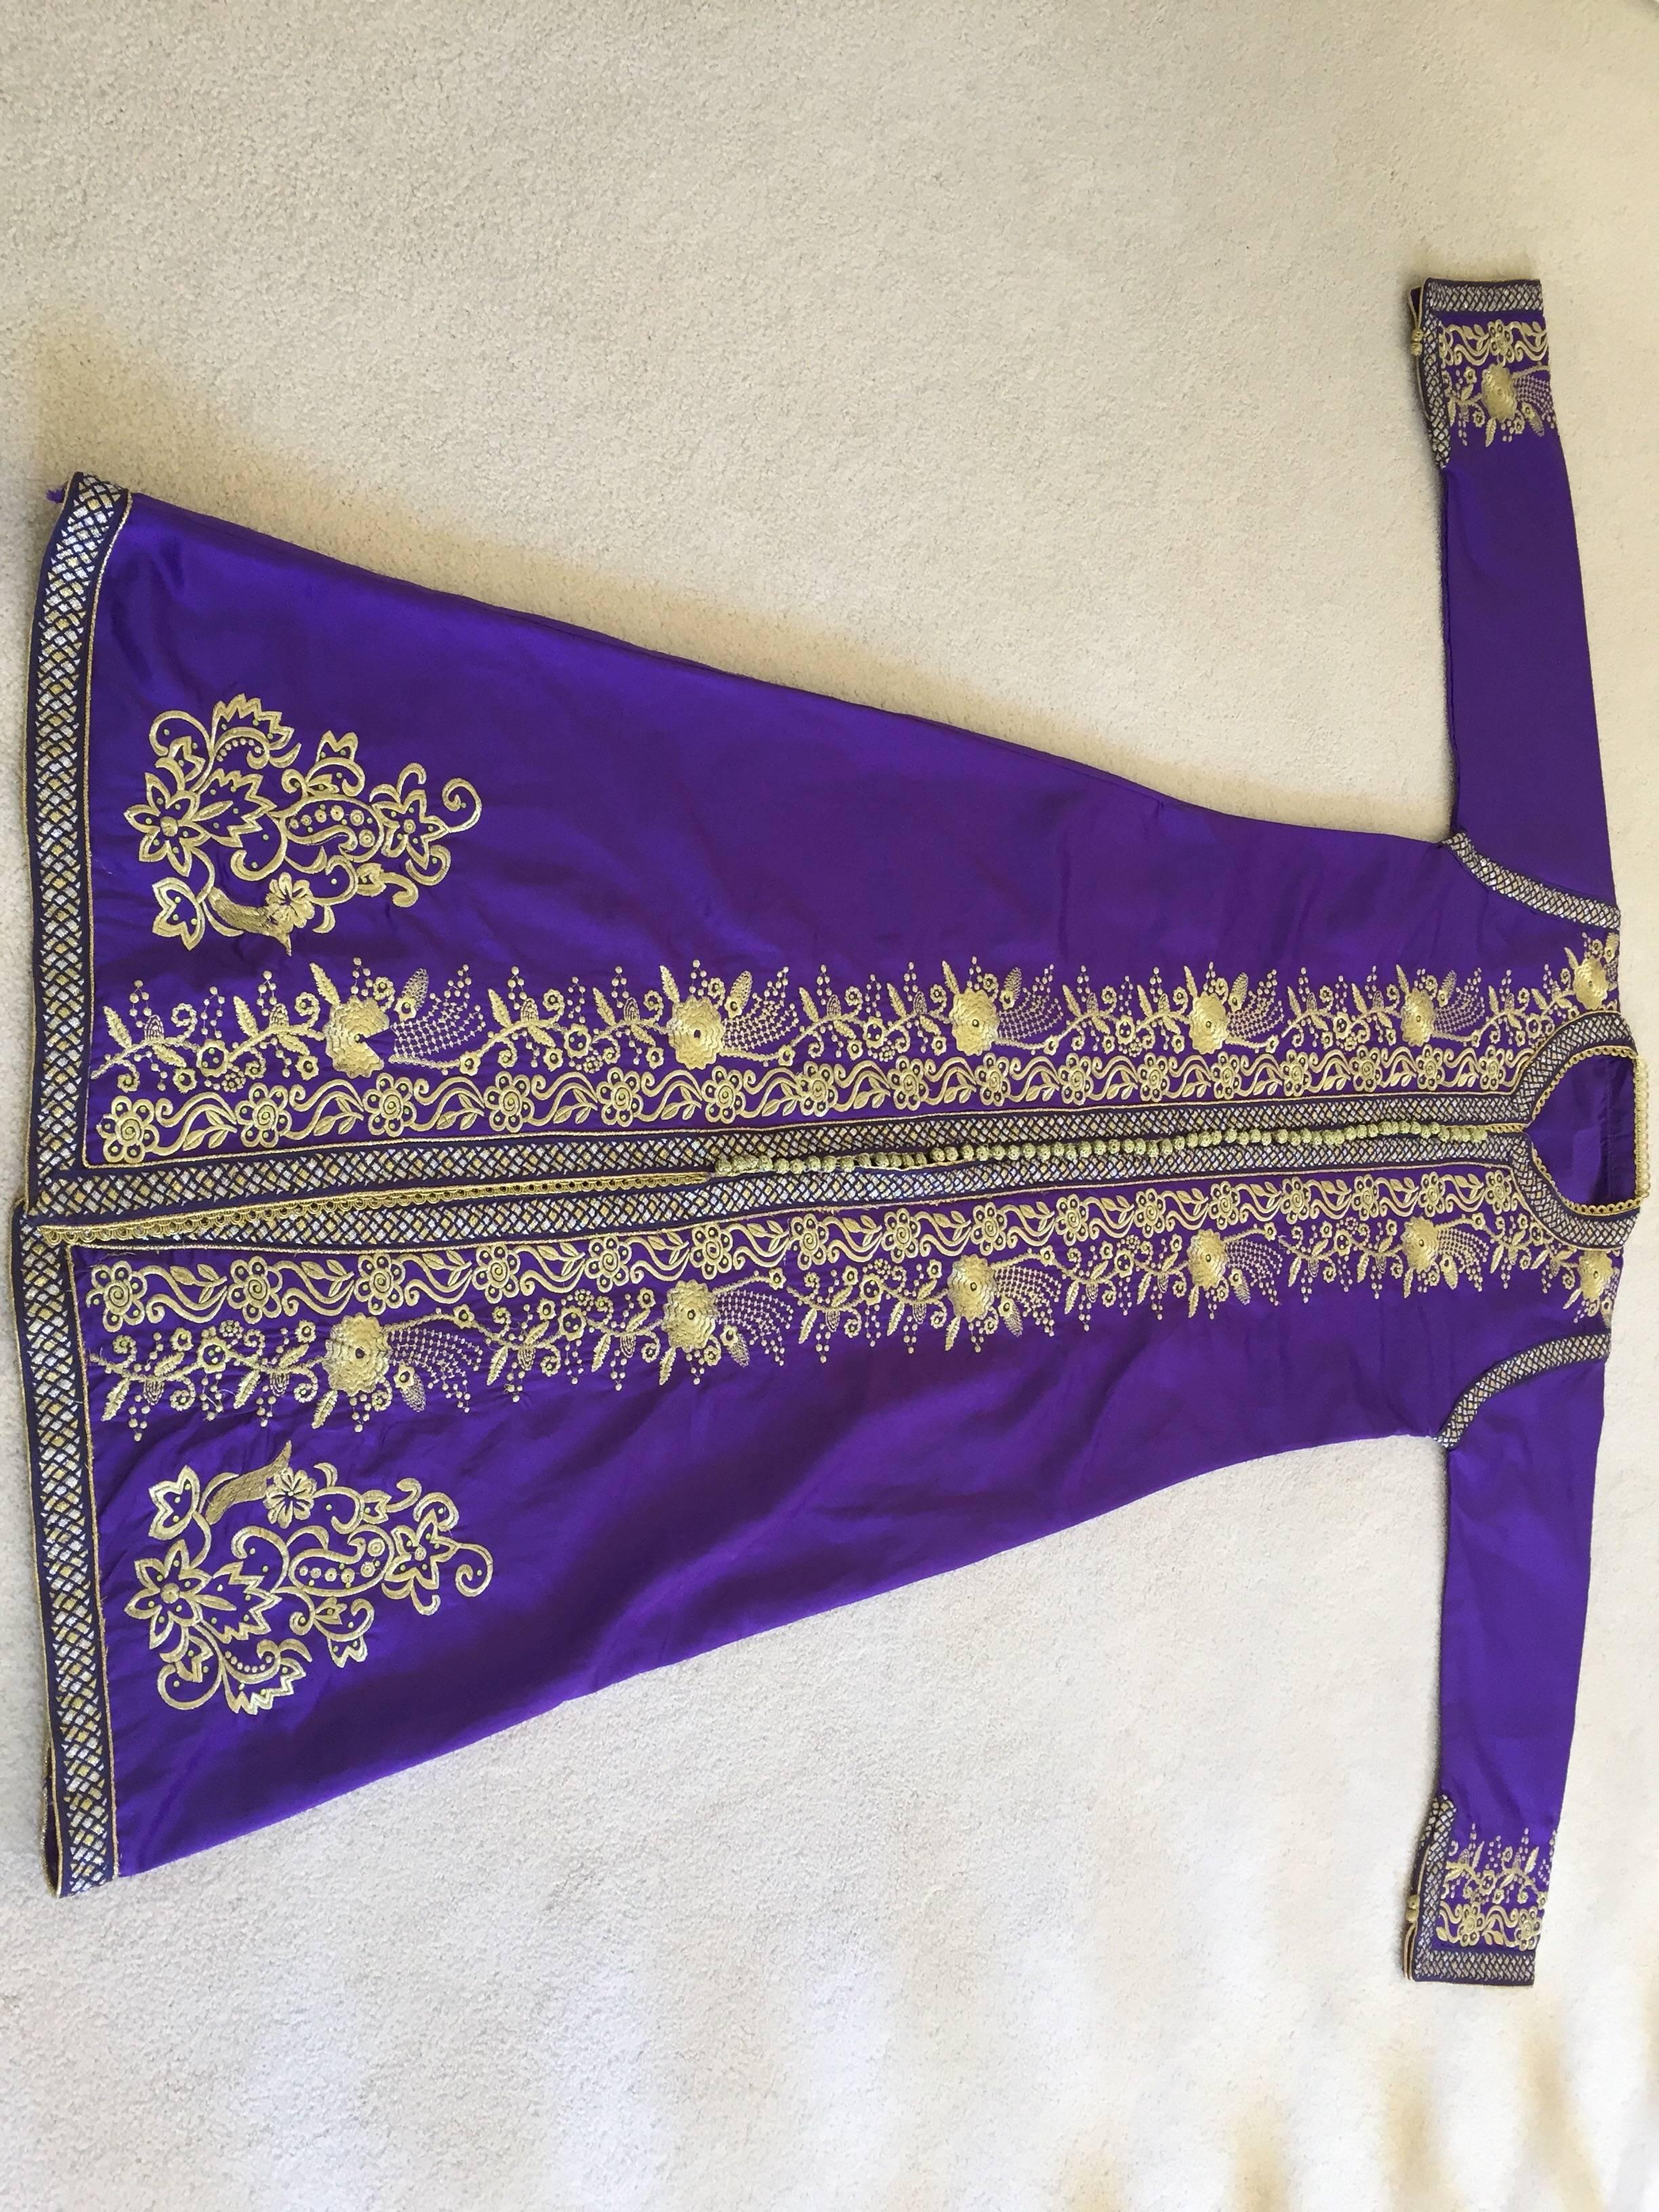 20th Century Moroccan Kaftan Purple and Gold Embroidered Maxi Dress Caftan